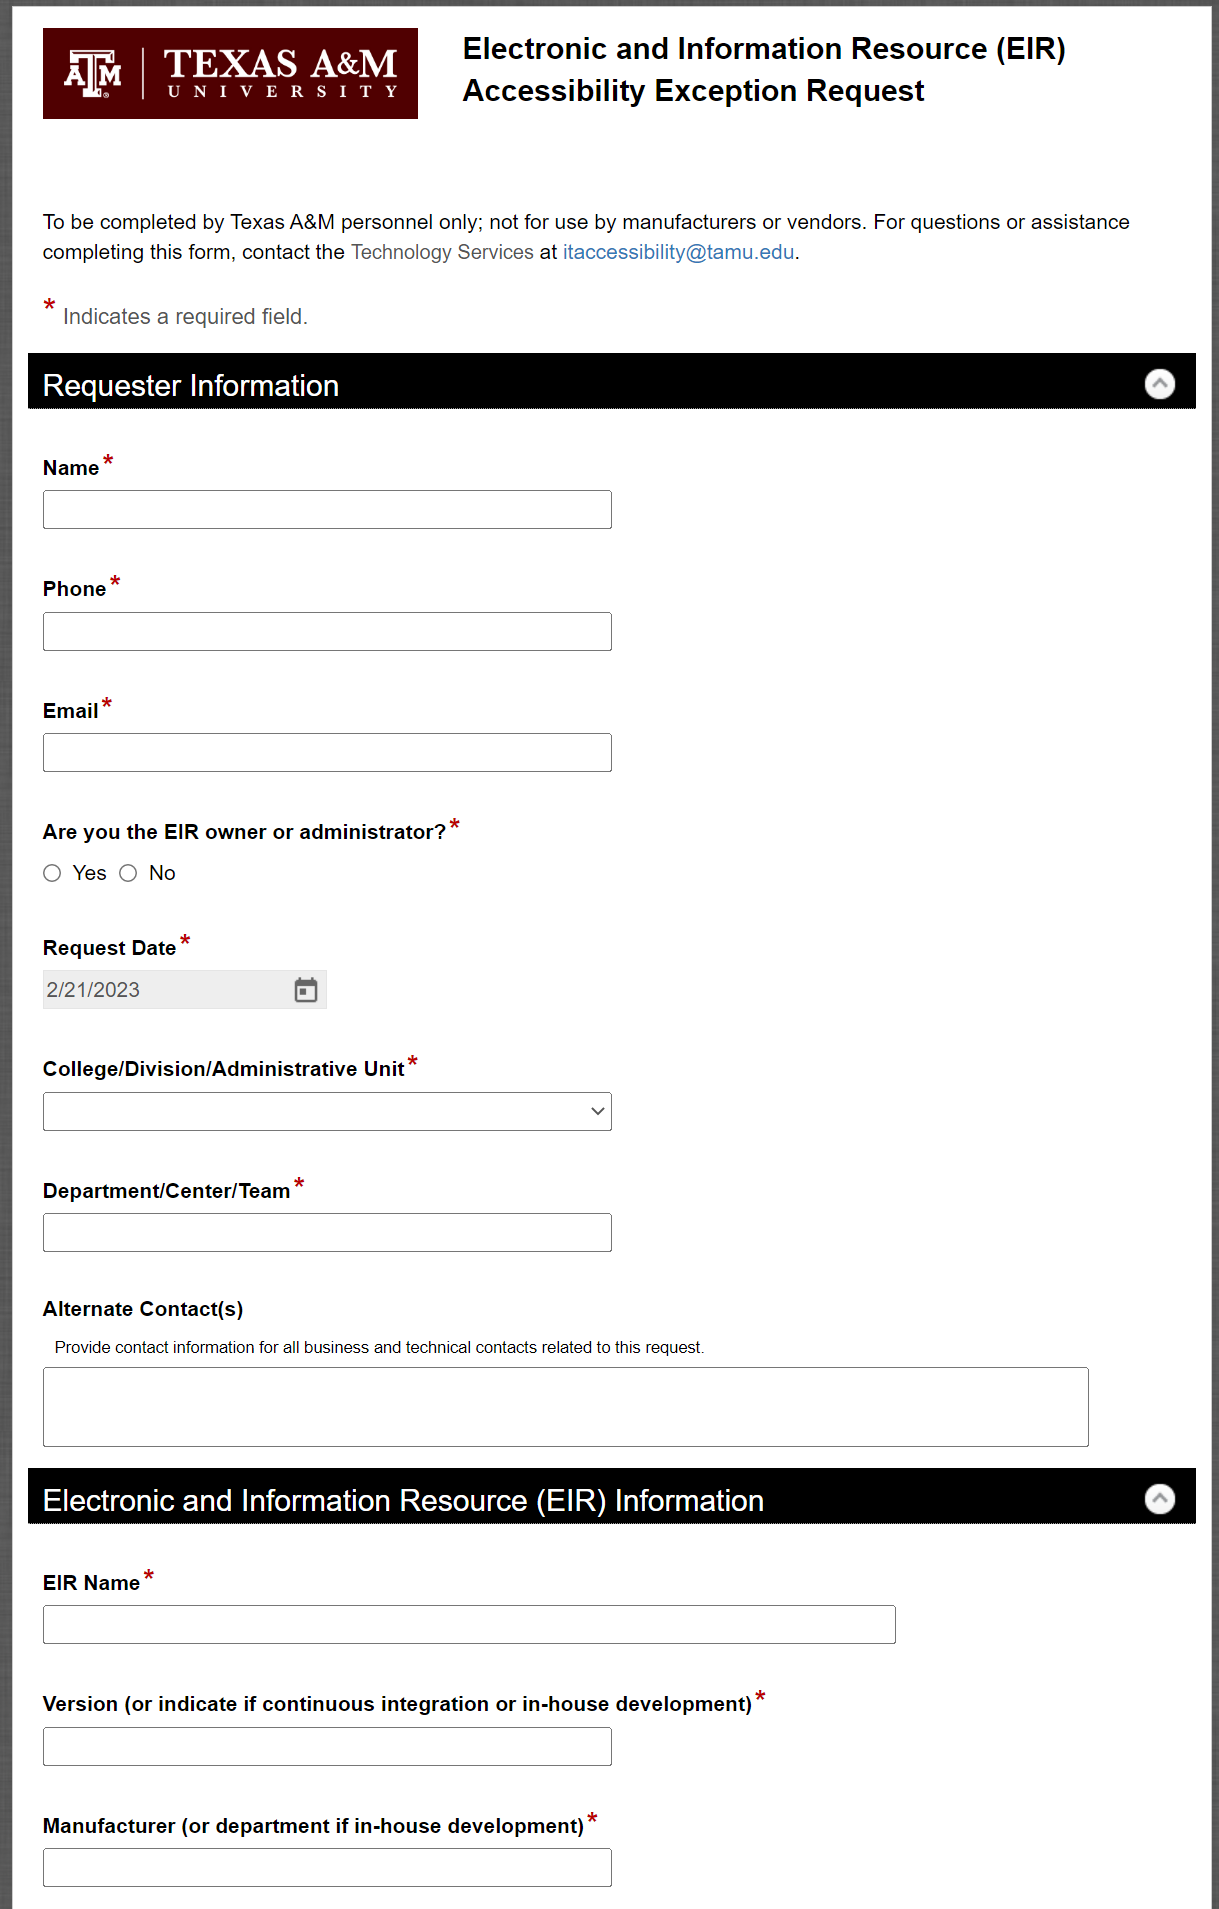 Electronic and Information Resource (EIR) Accessibility Exception Request Process-Form